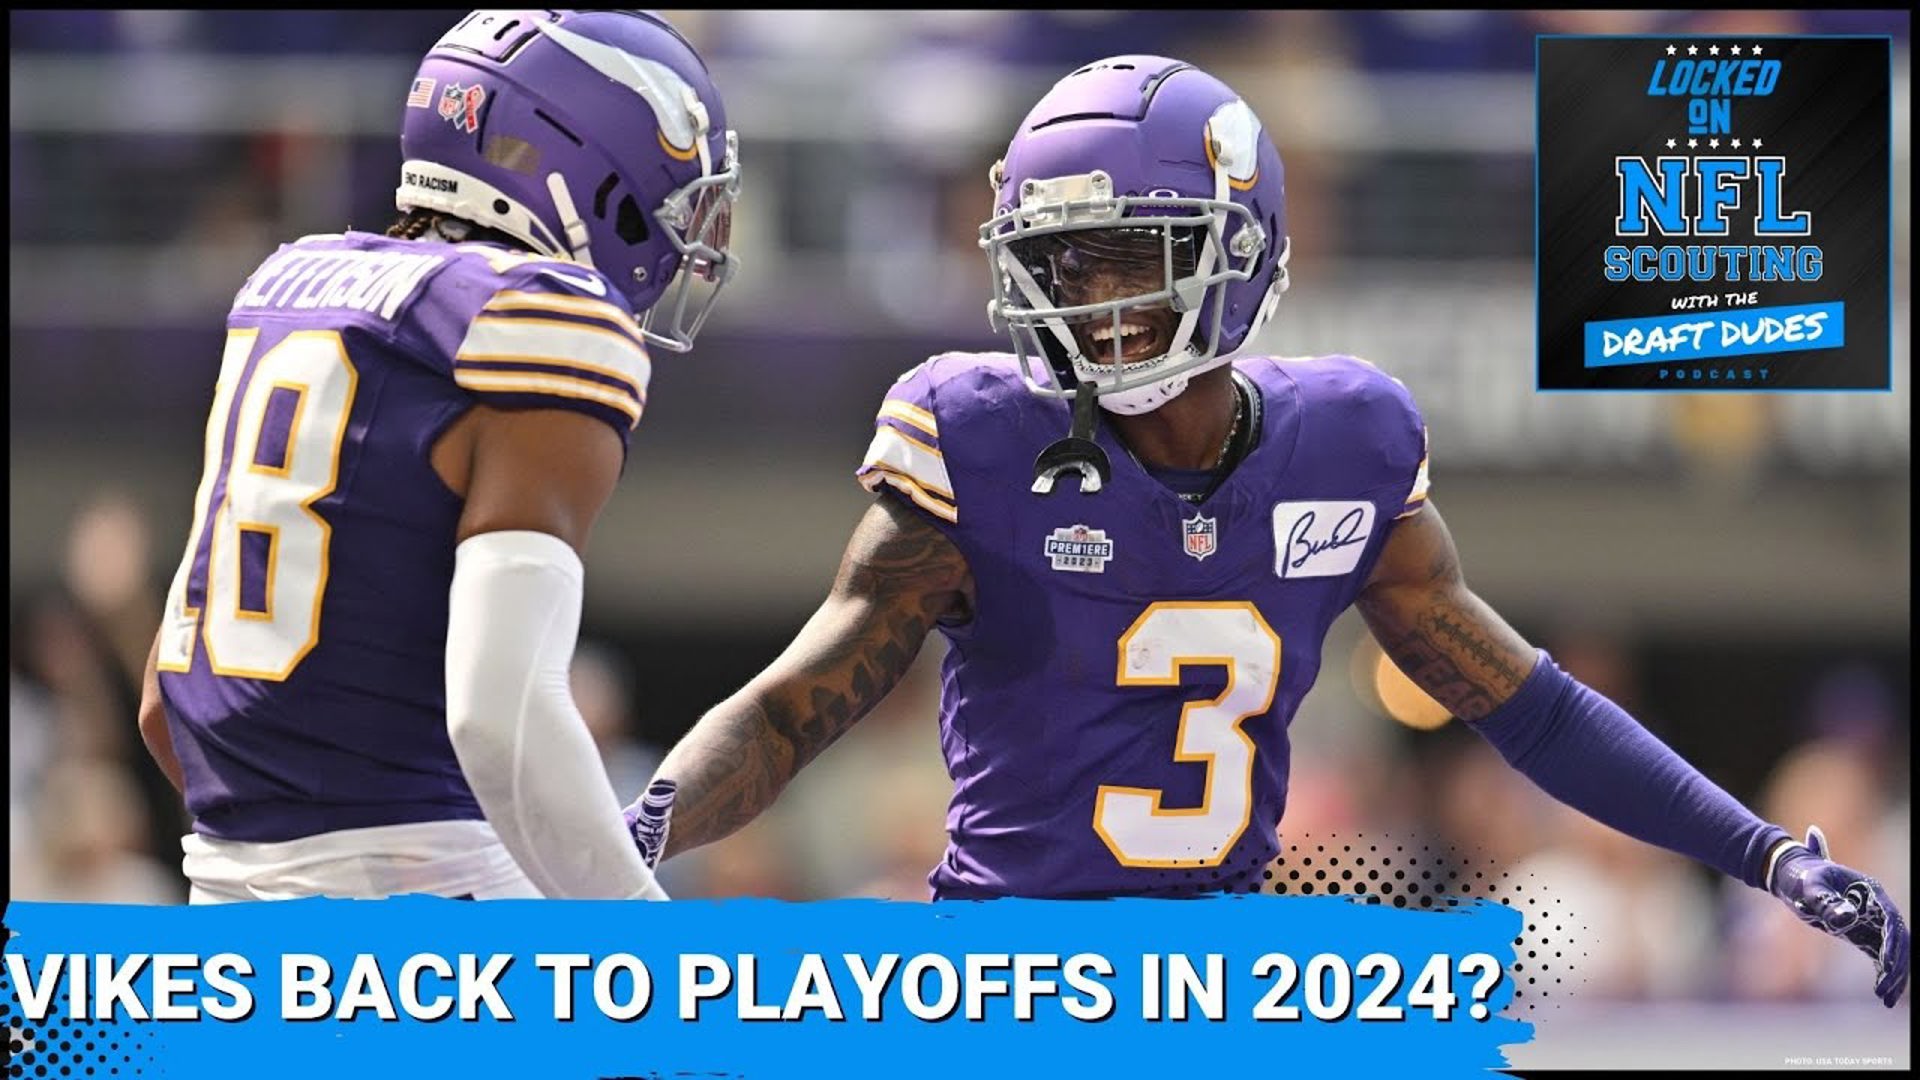 The Minnesota Vikings take center stage as we continue our 2024 State of the Roster Series. On today's episode, Joe Marino and Kyle Crabbs break down the Vikings